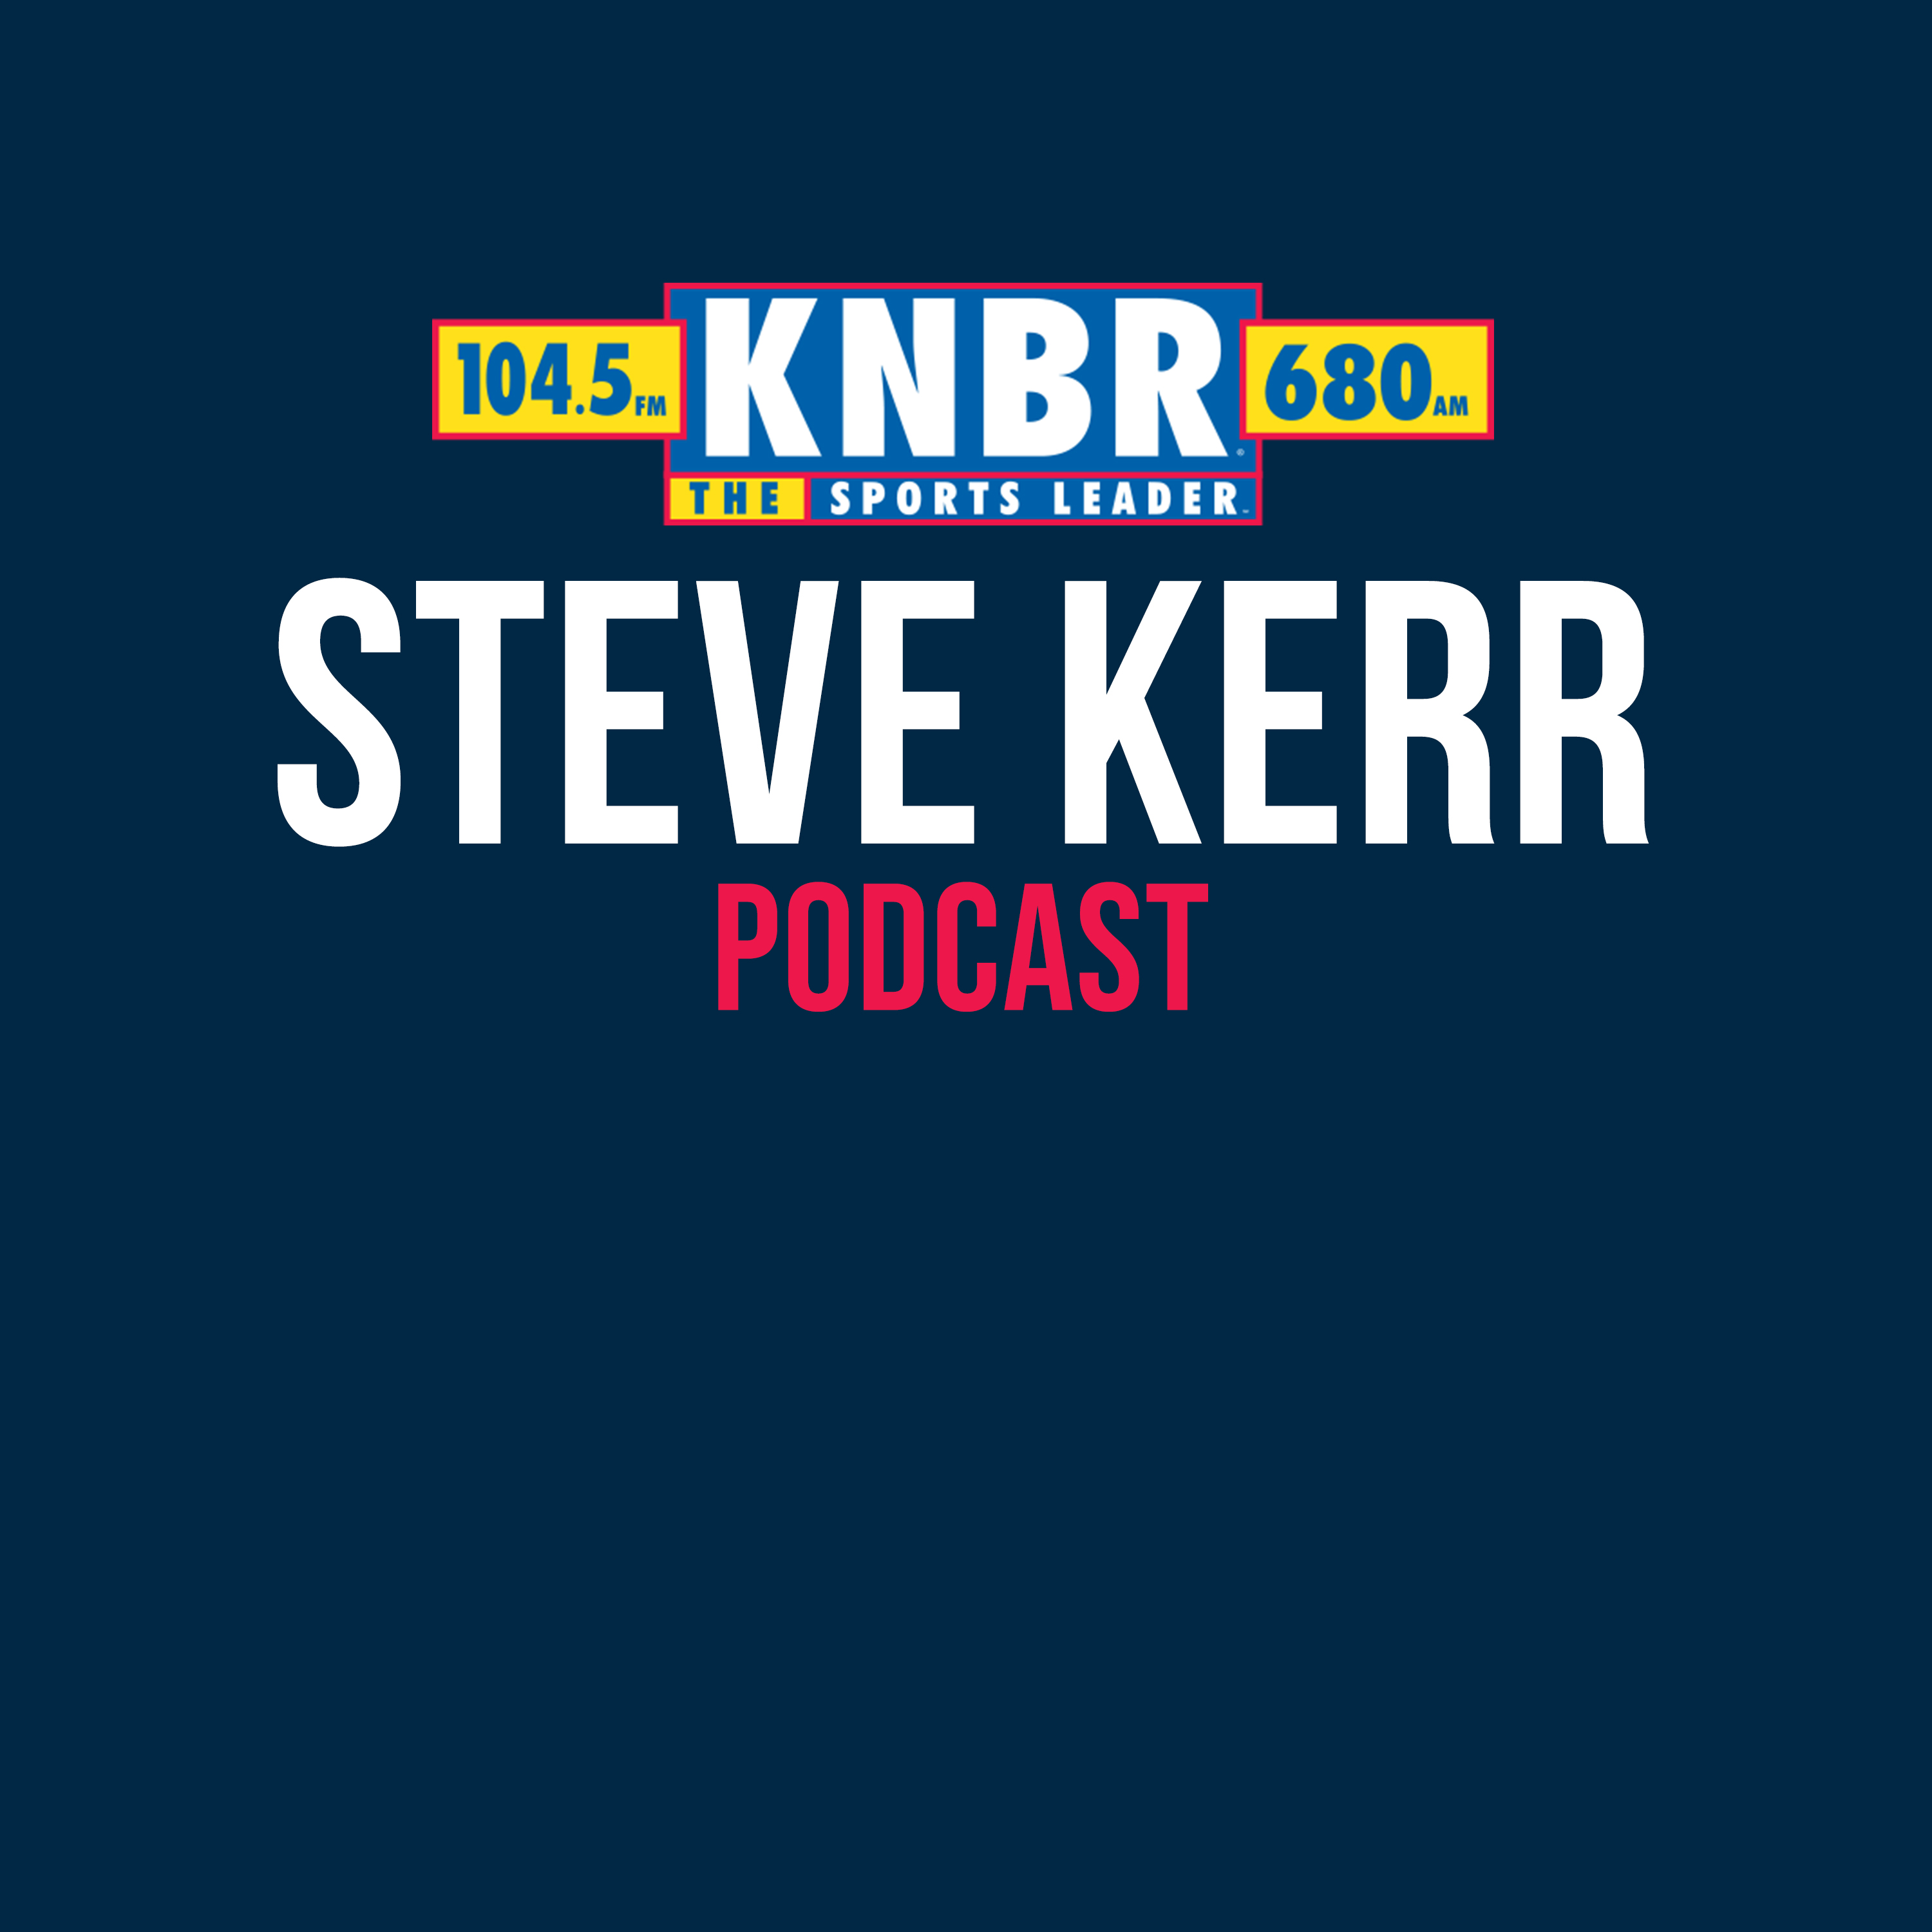 11-23 Steve Kerr joins TKB to discuss where Klay Thompson is in his rehab and when we can expect to see Klay back on the court